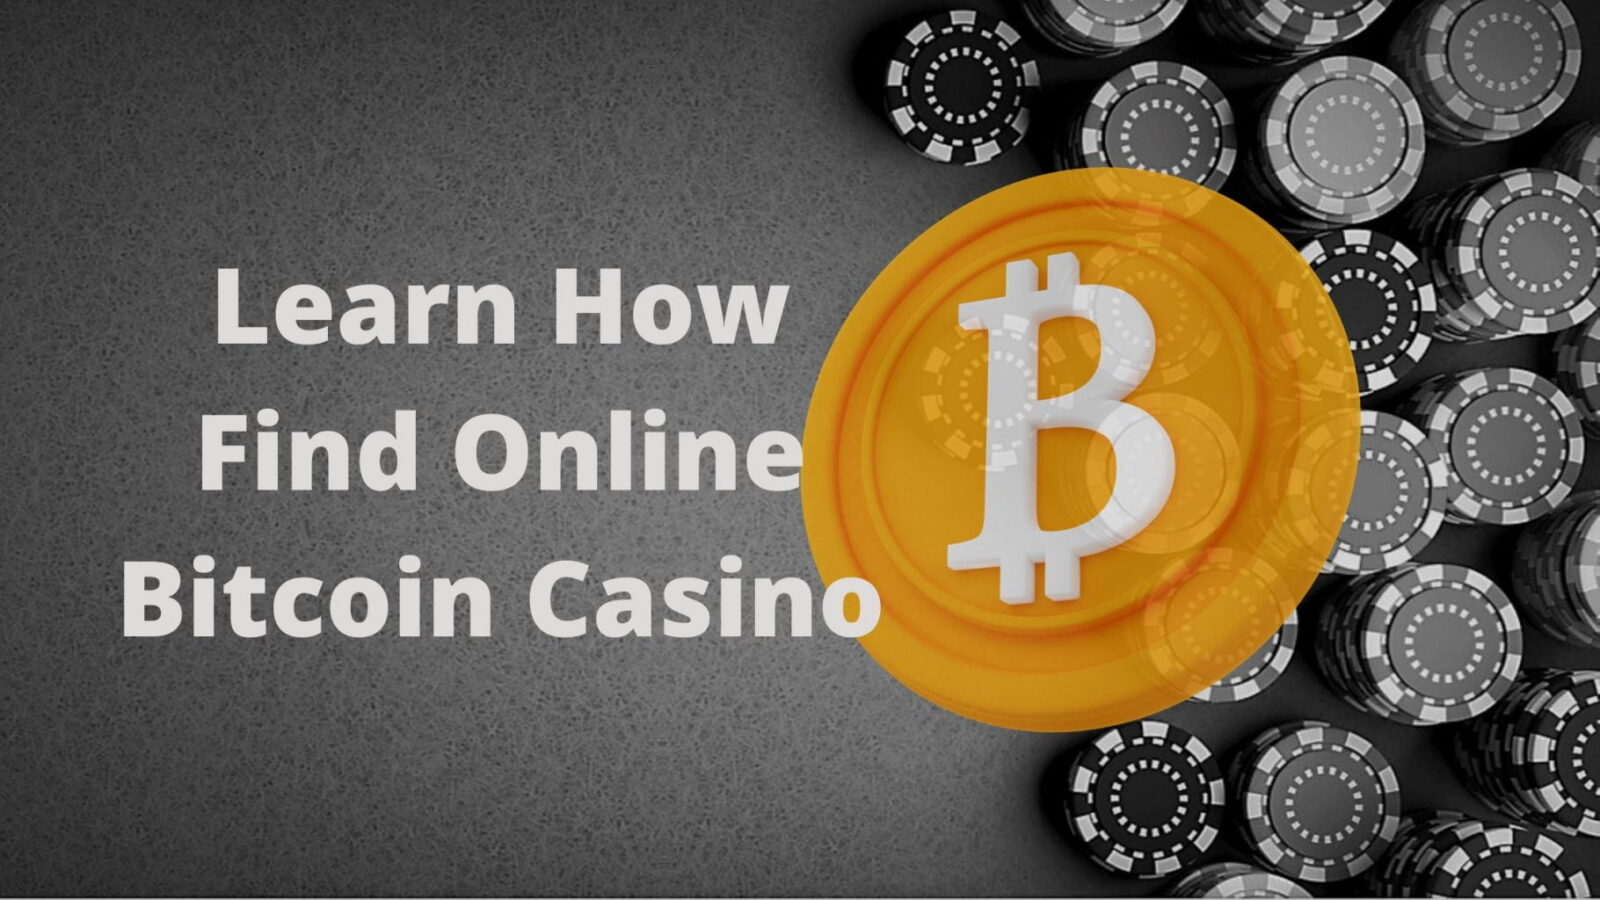 bitcoin casino site: This Is What Professionals Do